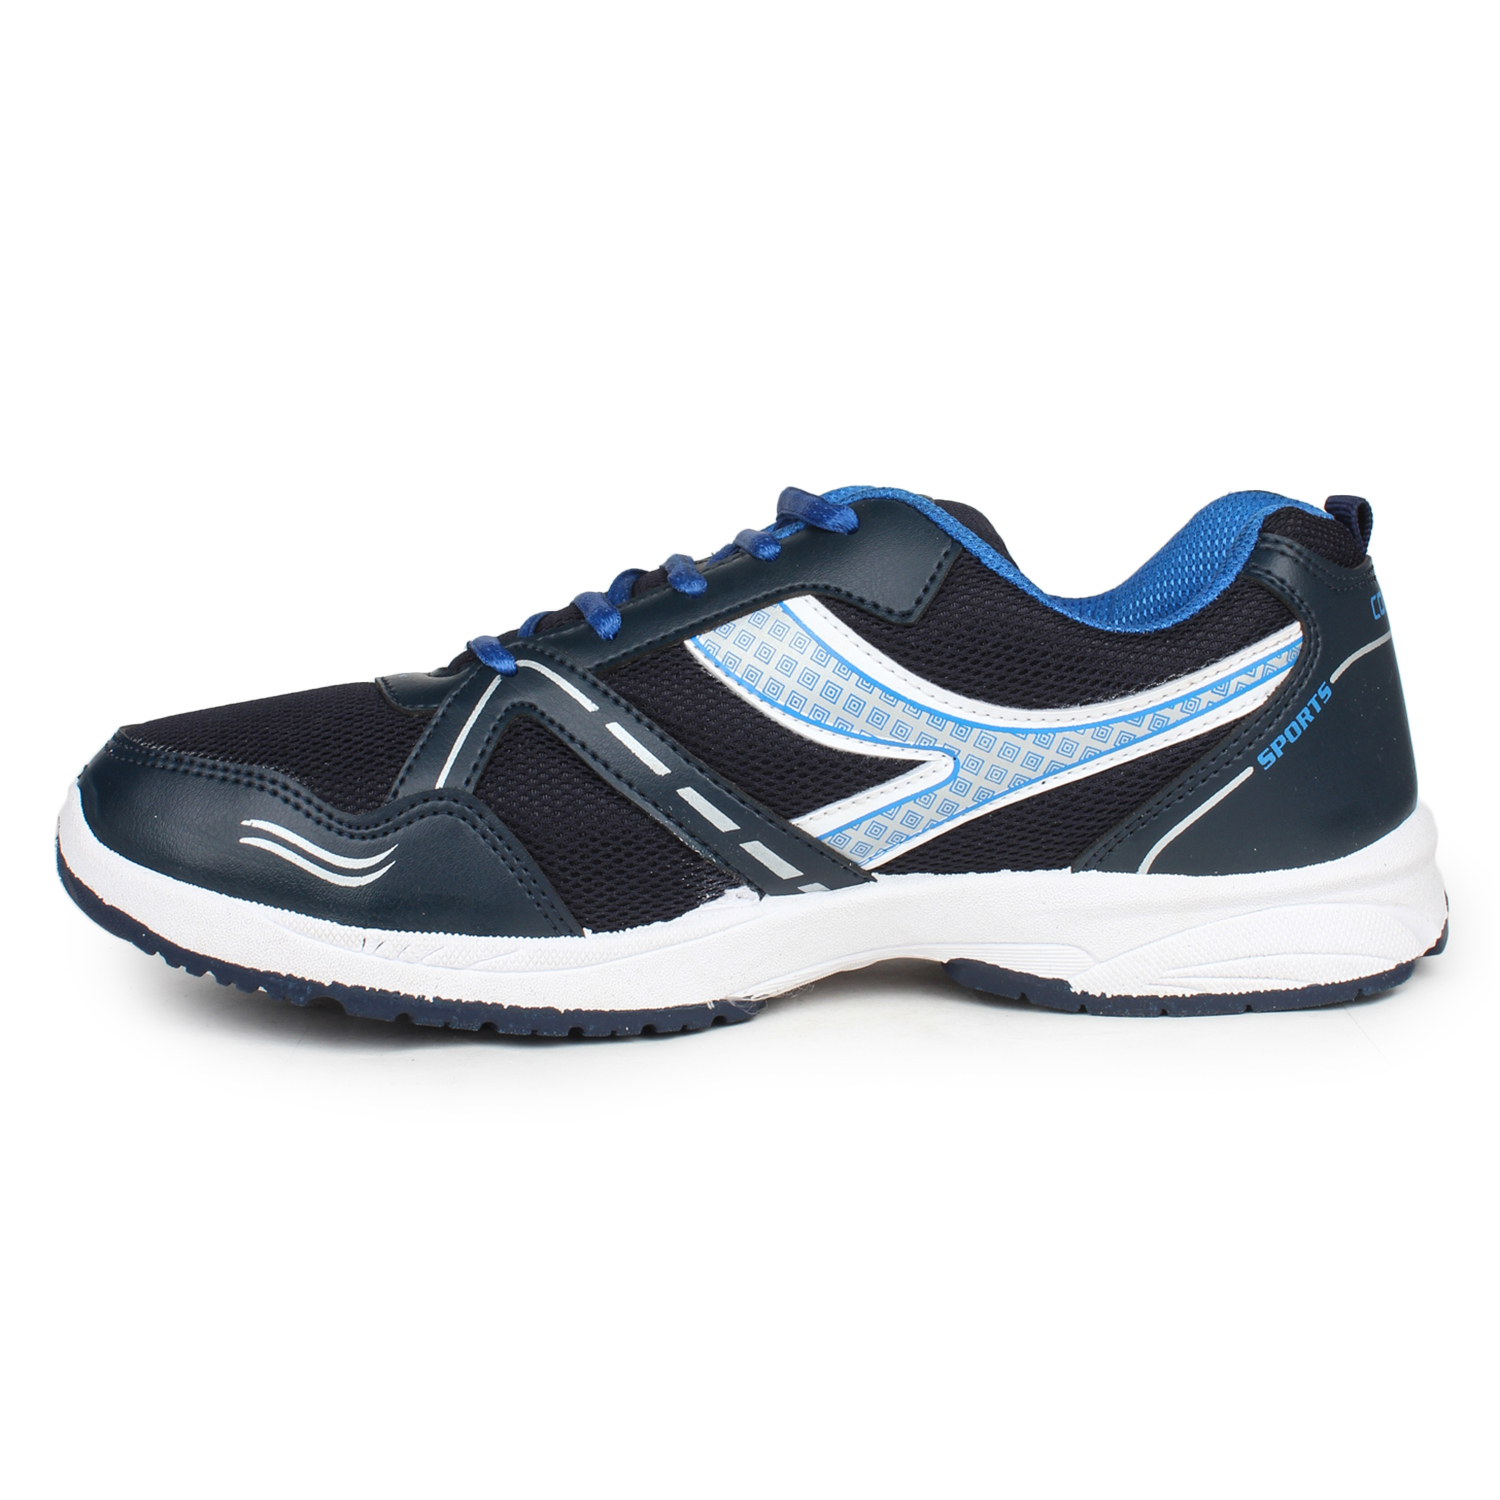 Buy Columbus Women's Blue Sports Shoes Online @ ₹499 from ShopClues